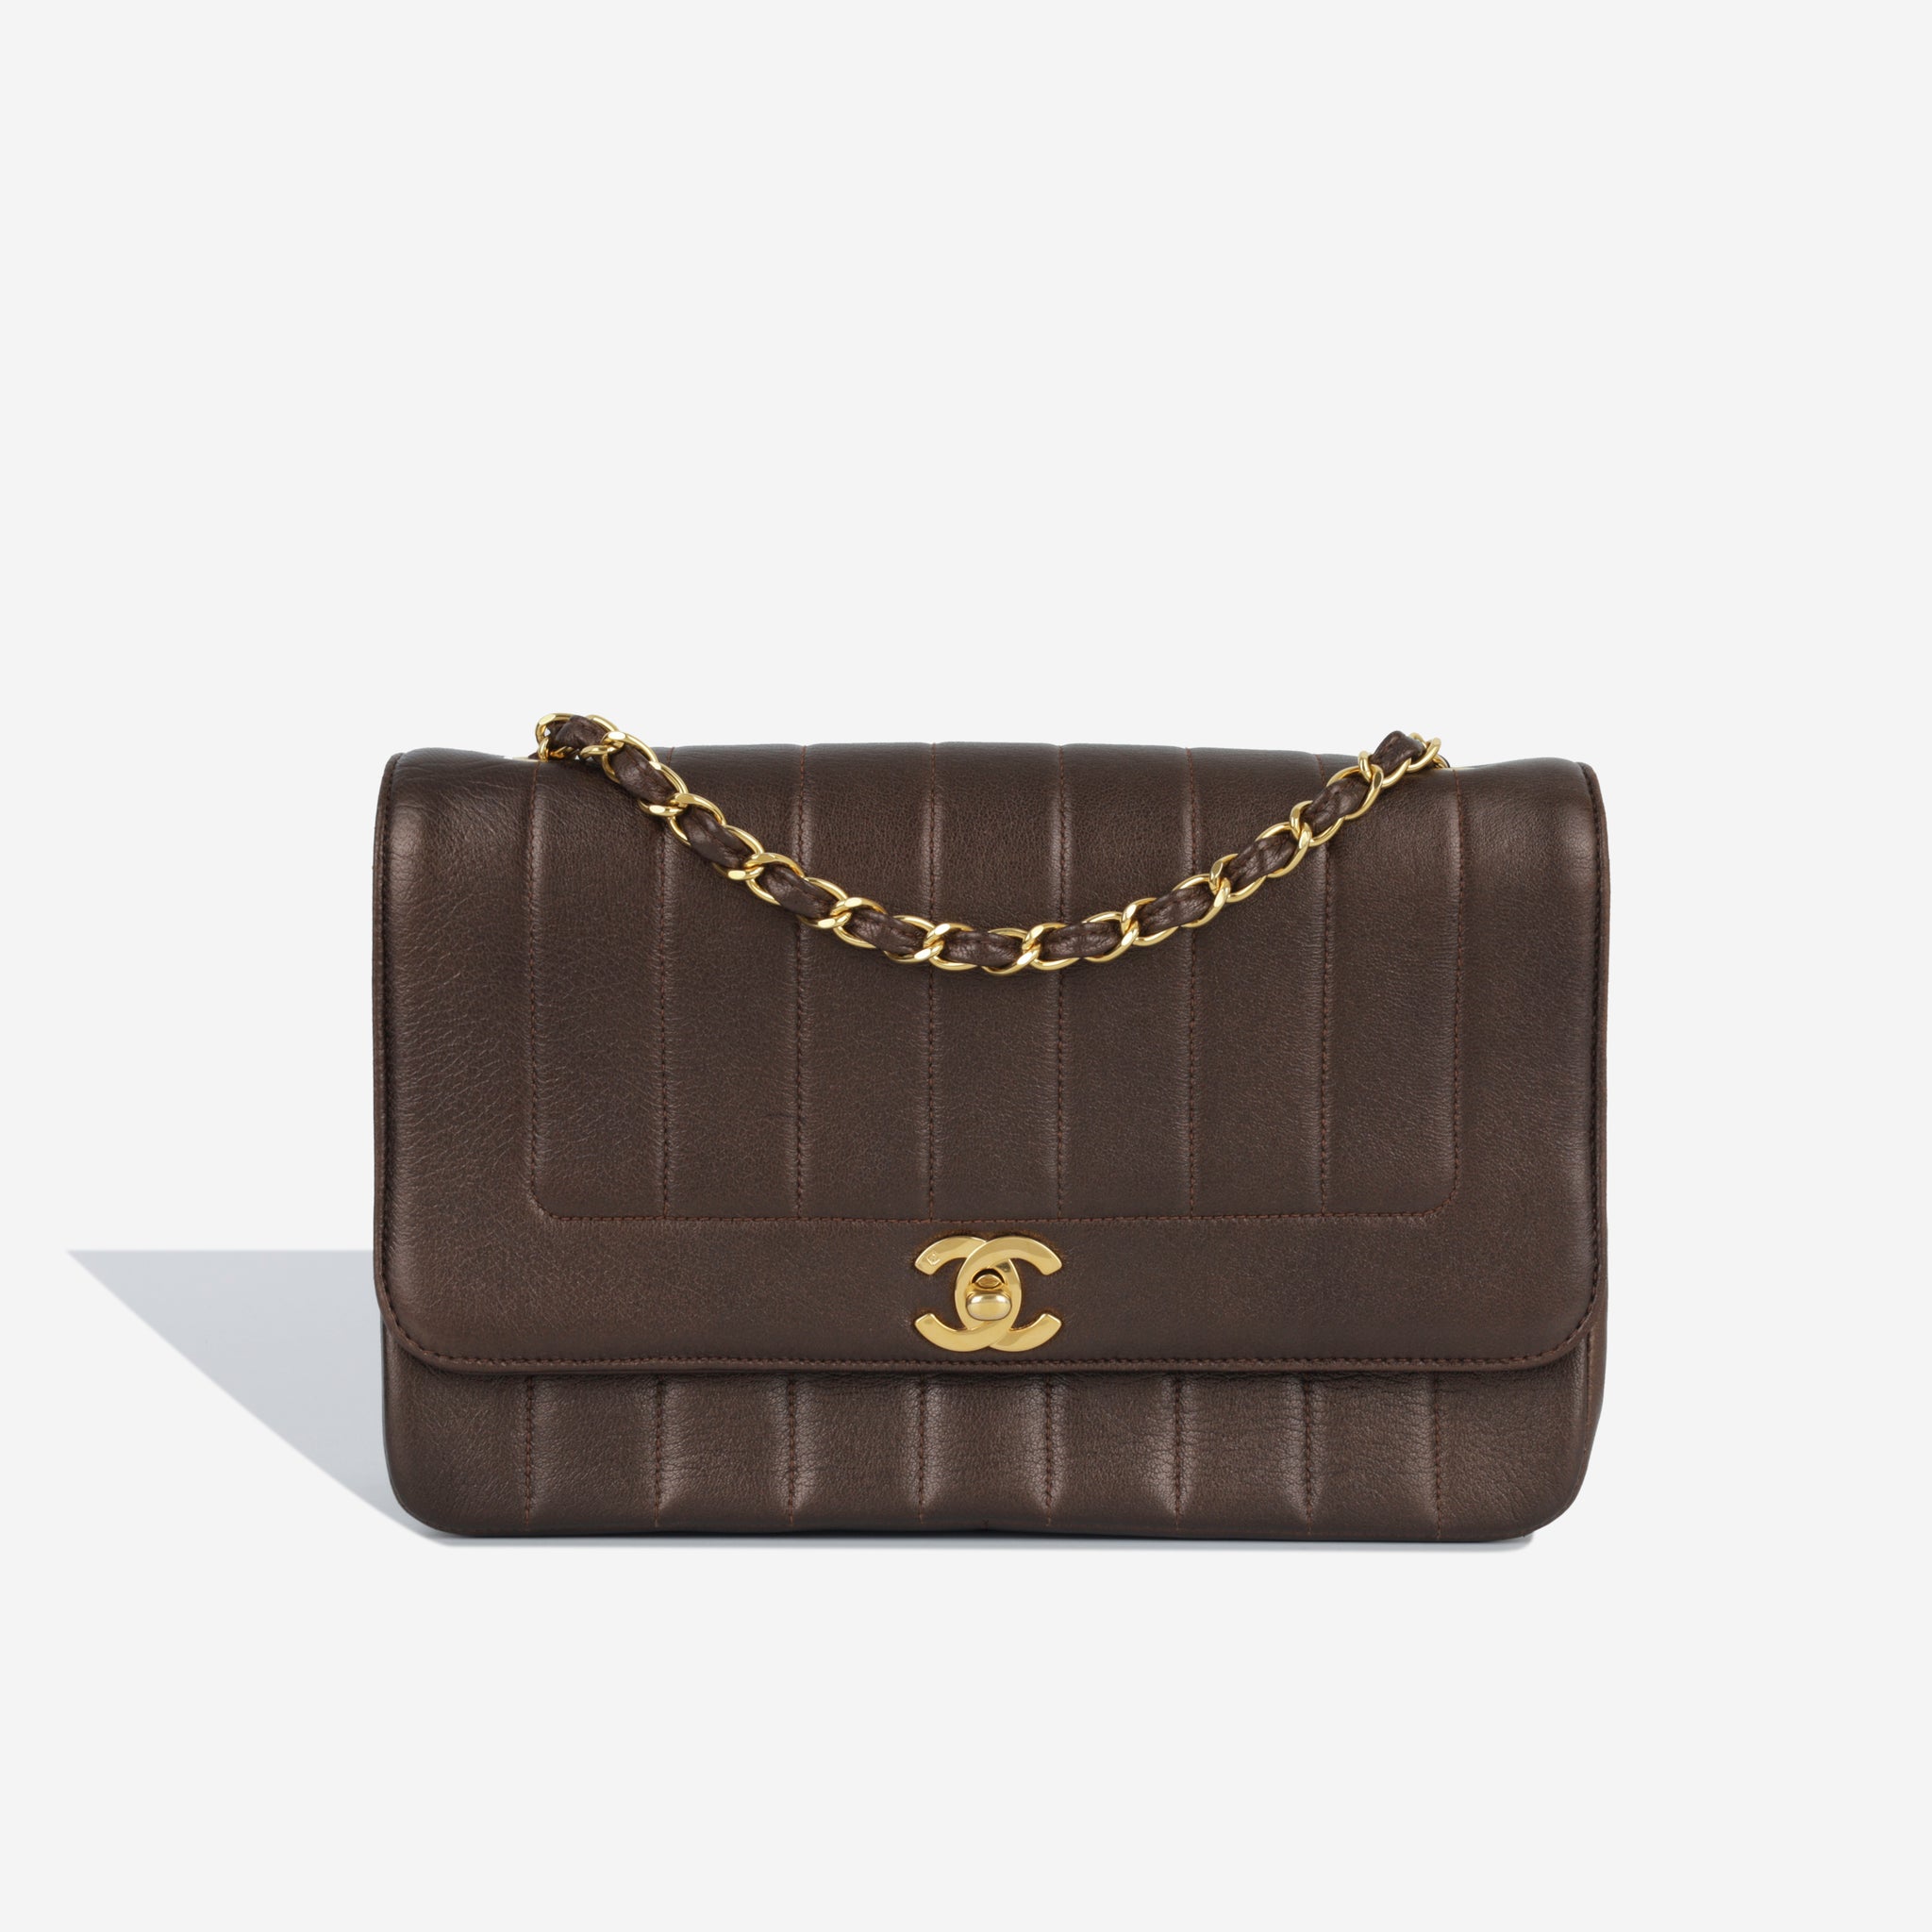 CHANEL  BEIGE LEATHER AND GOLD-TONE METAL CLASSIC SHOULDER BAG